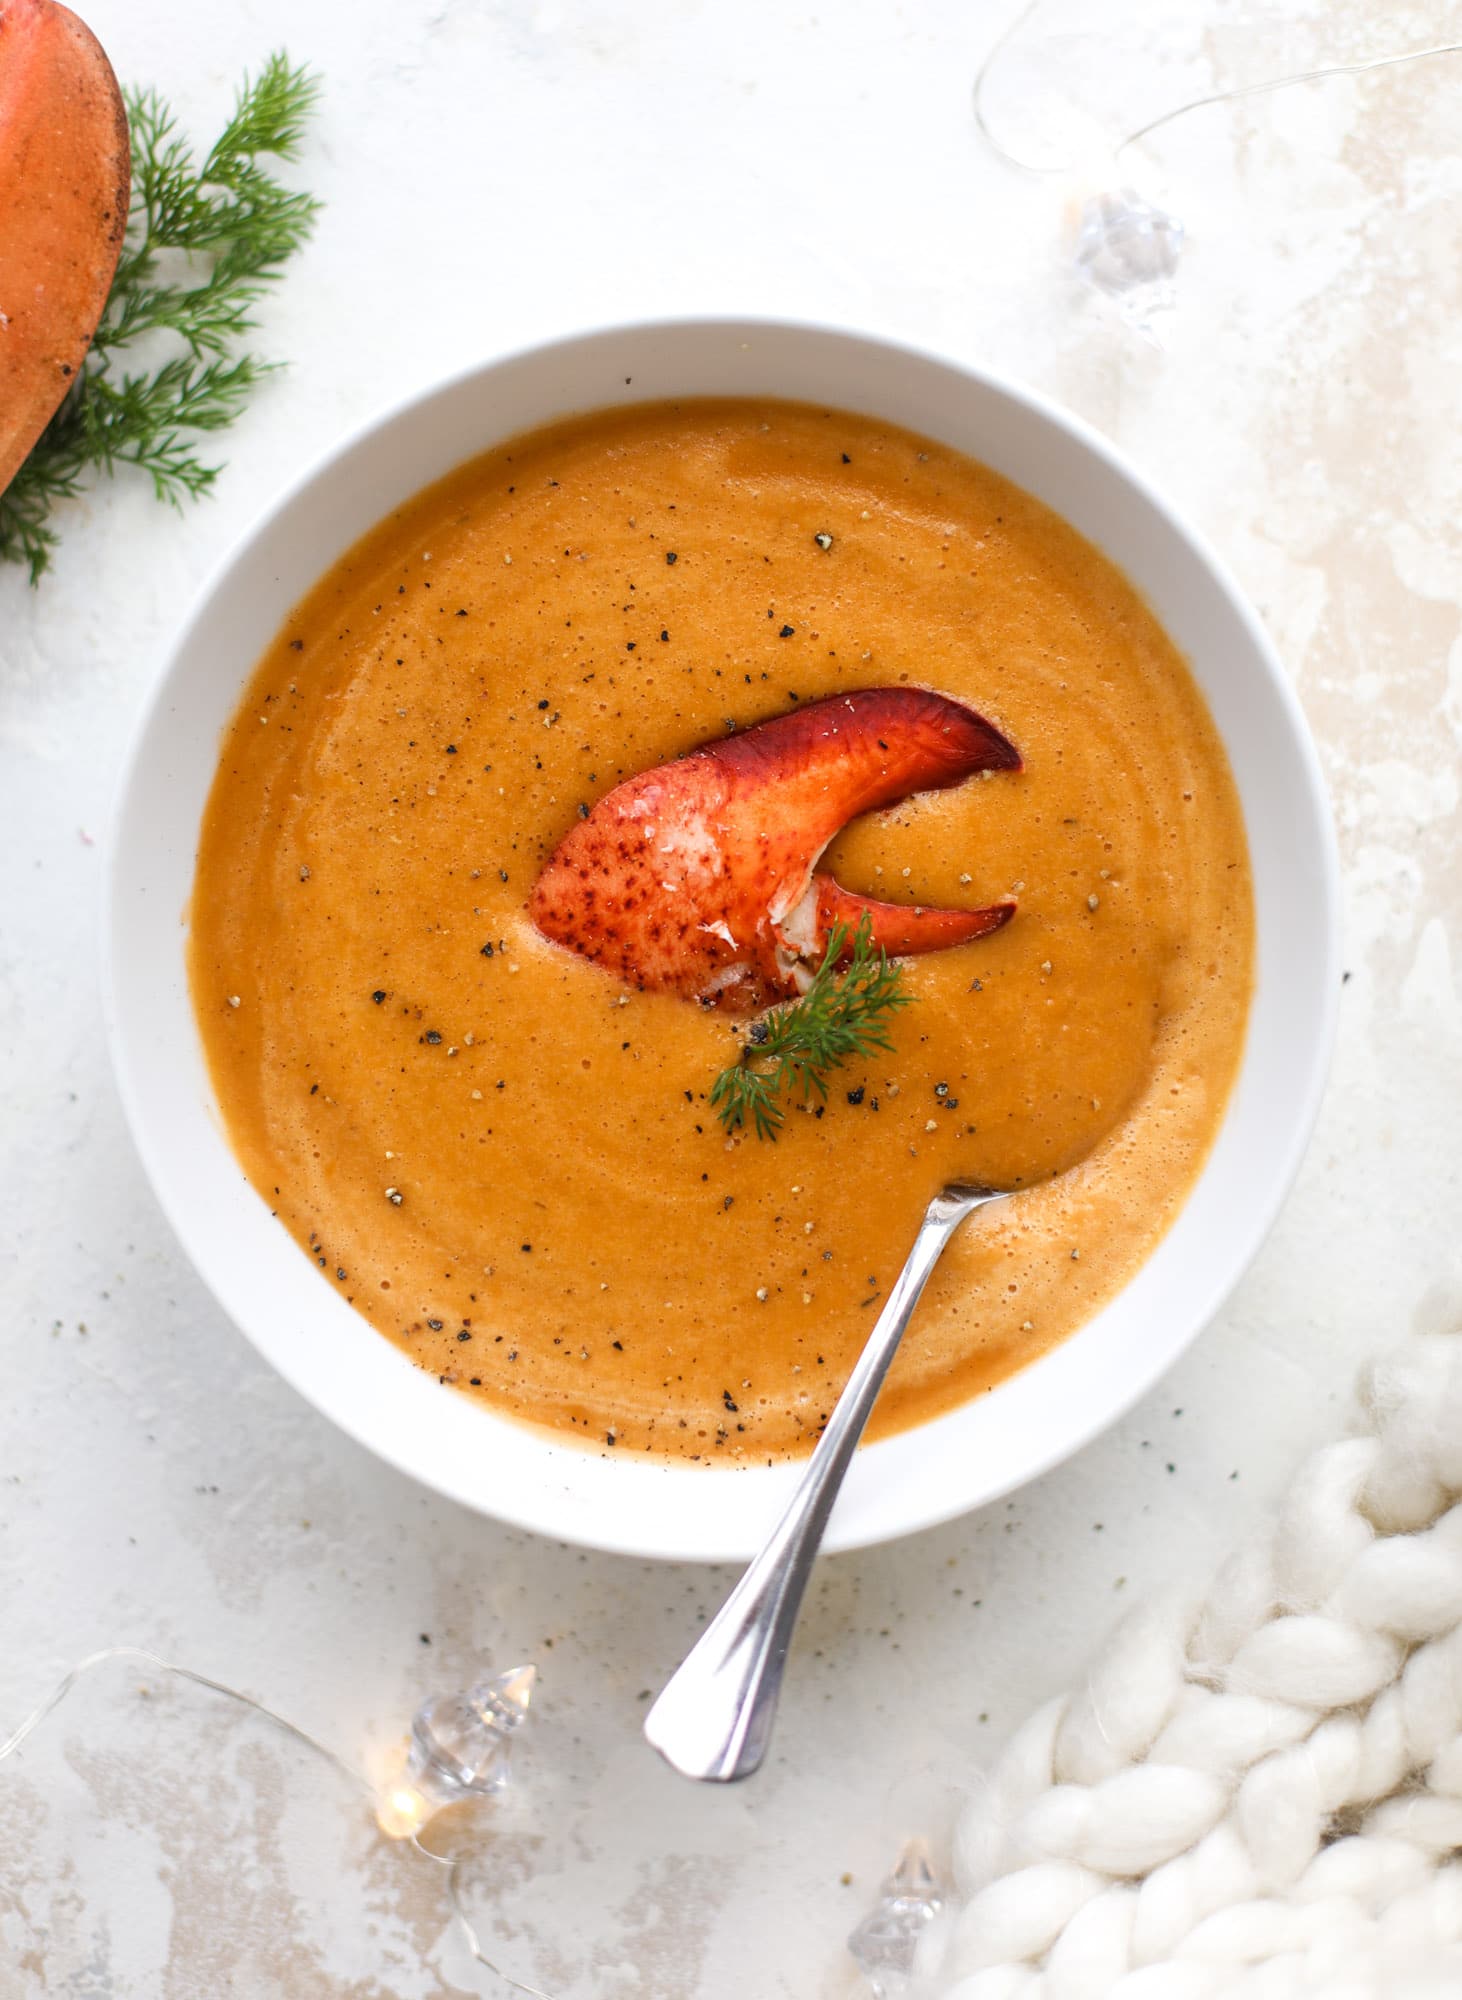 This lobster bisque recipe is delicious, easy and always a crowd pleaser! It's so simple to make at home and it's a rich, decadent treat to serve your family. I also show you how to make a lobster cappuccino, which is lobster bisque with foamed cream! I howsweeteats.com #lobster #bisque